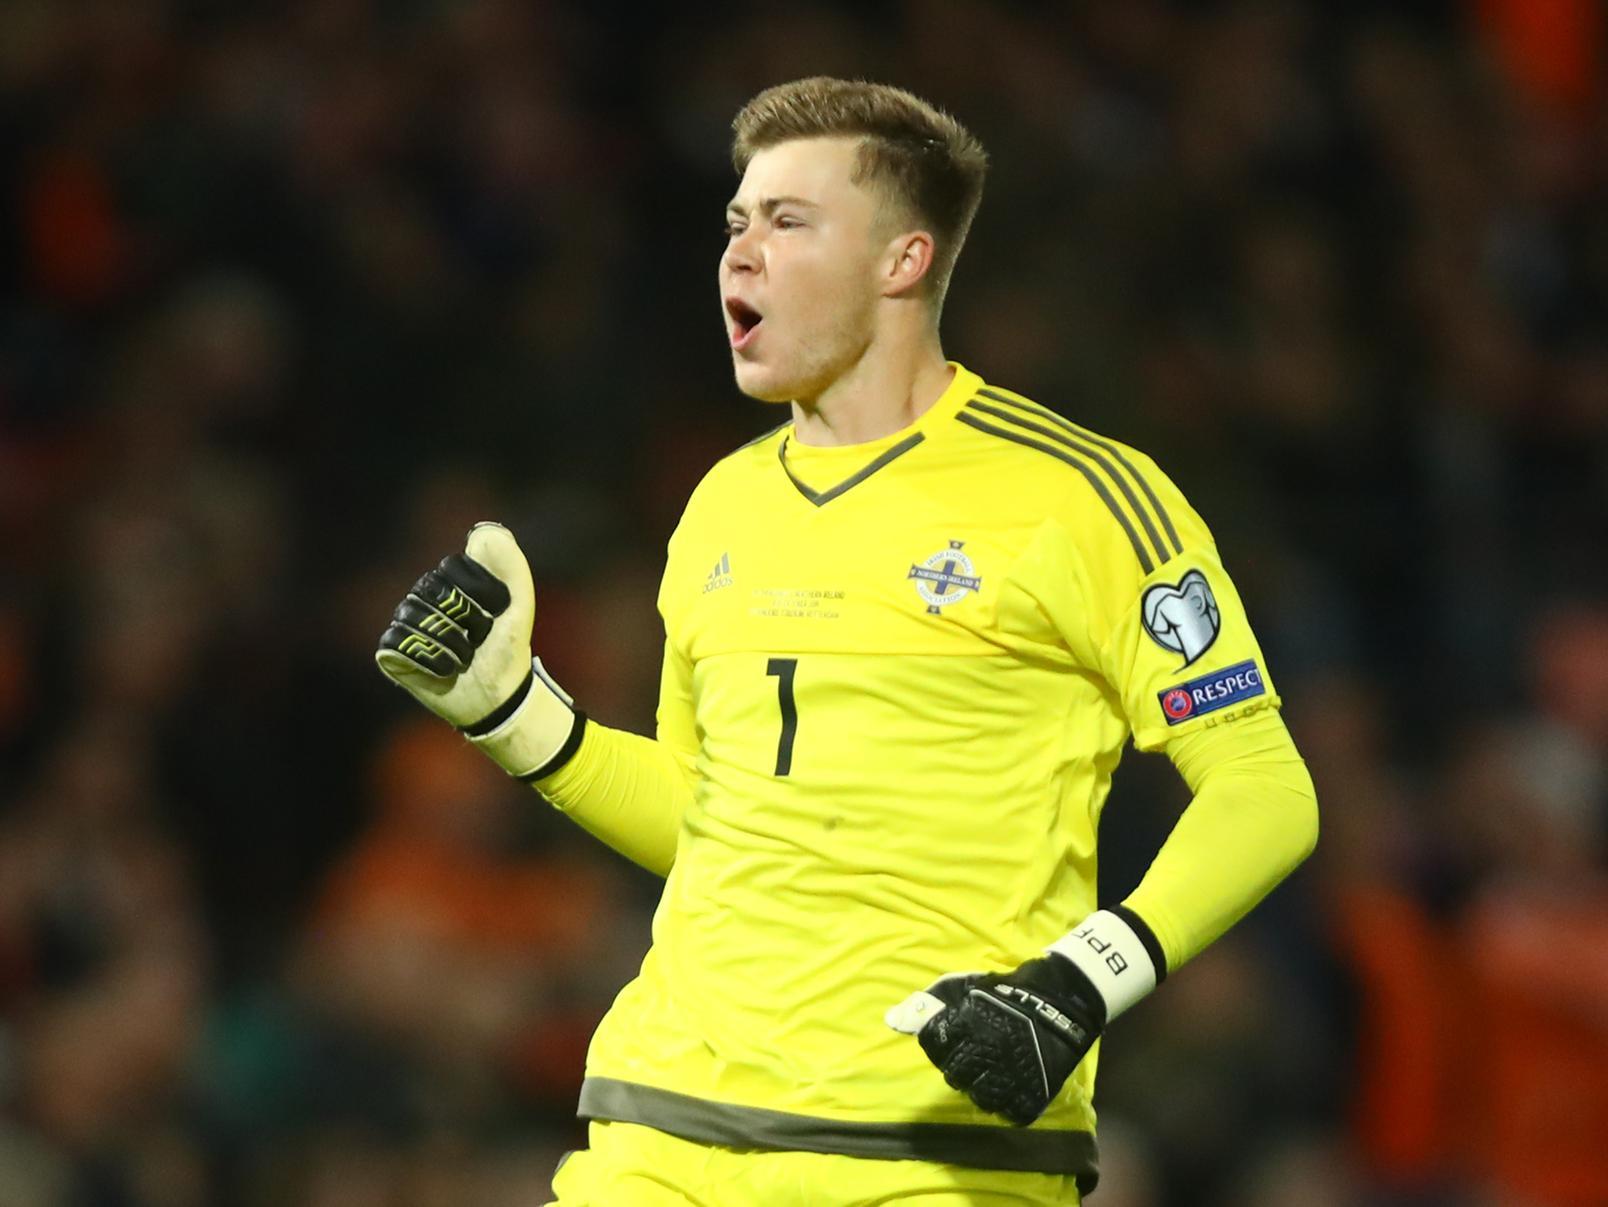 He's still no closer to first team football at Burnley, with Nick Pope and Joe Hart still ahead of him in the pecking order. Still, he'd doing a grand job between the sticks for Northern Ireland at least.